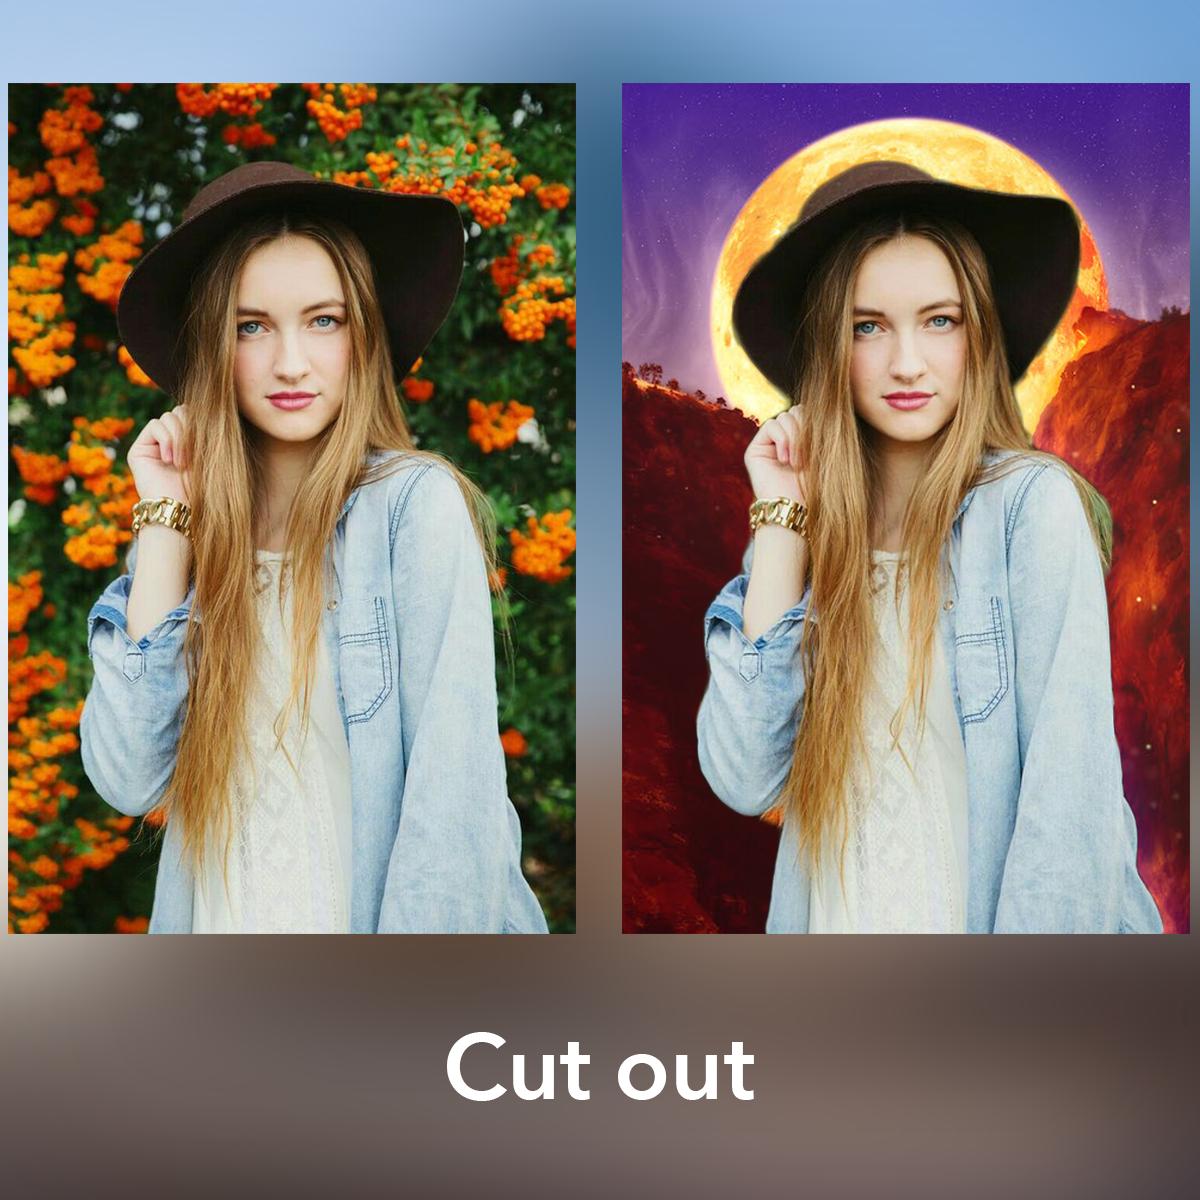 Photo Background Changer for Android - APK Download